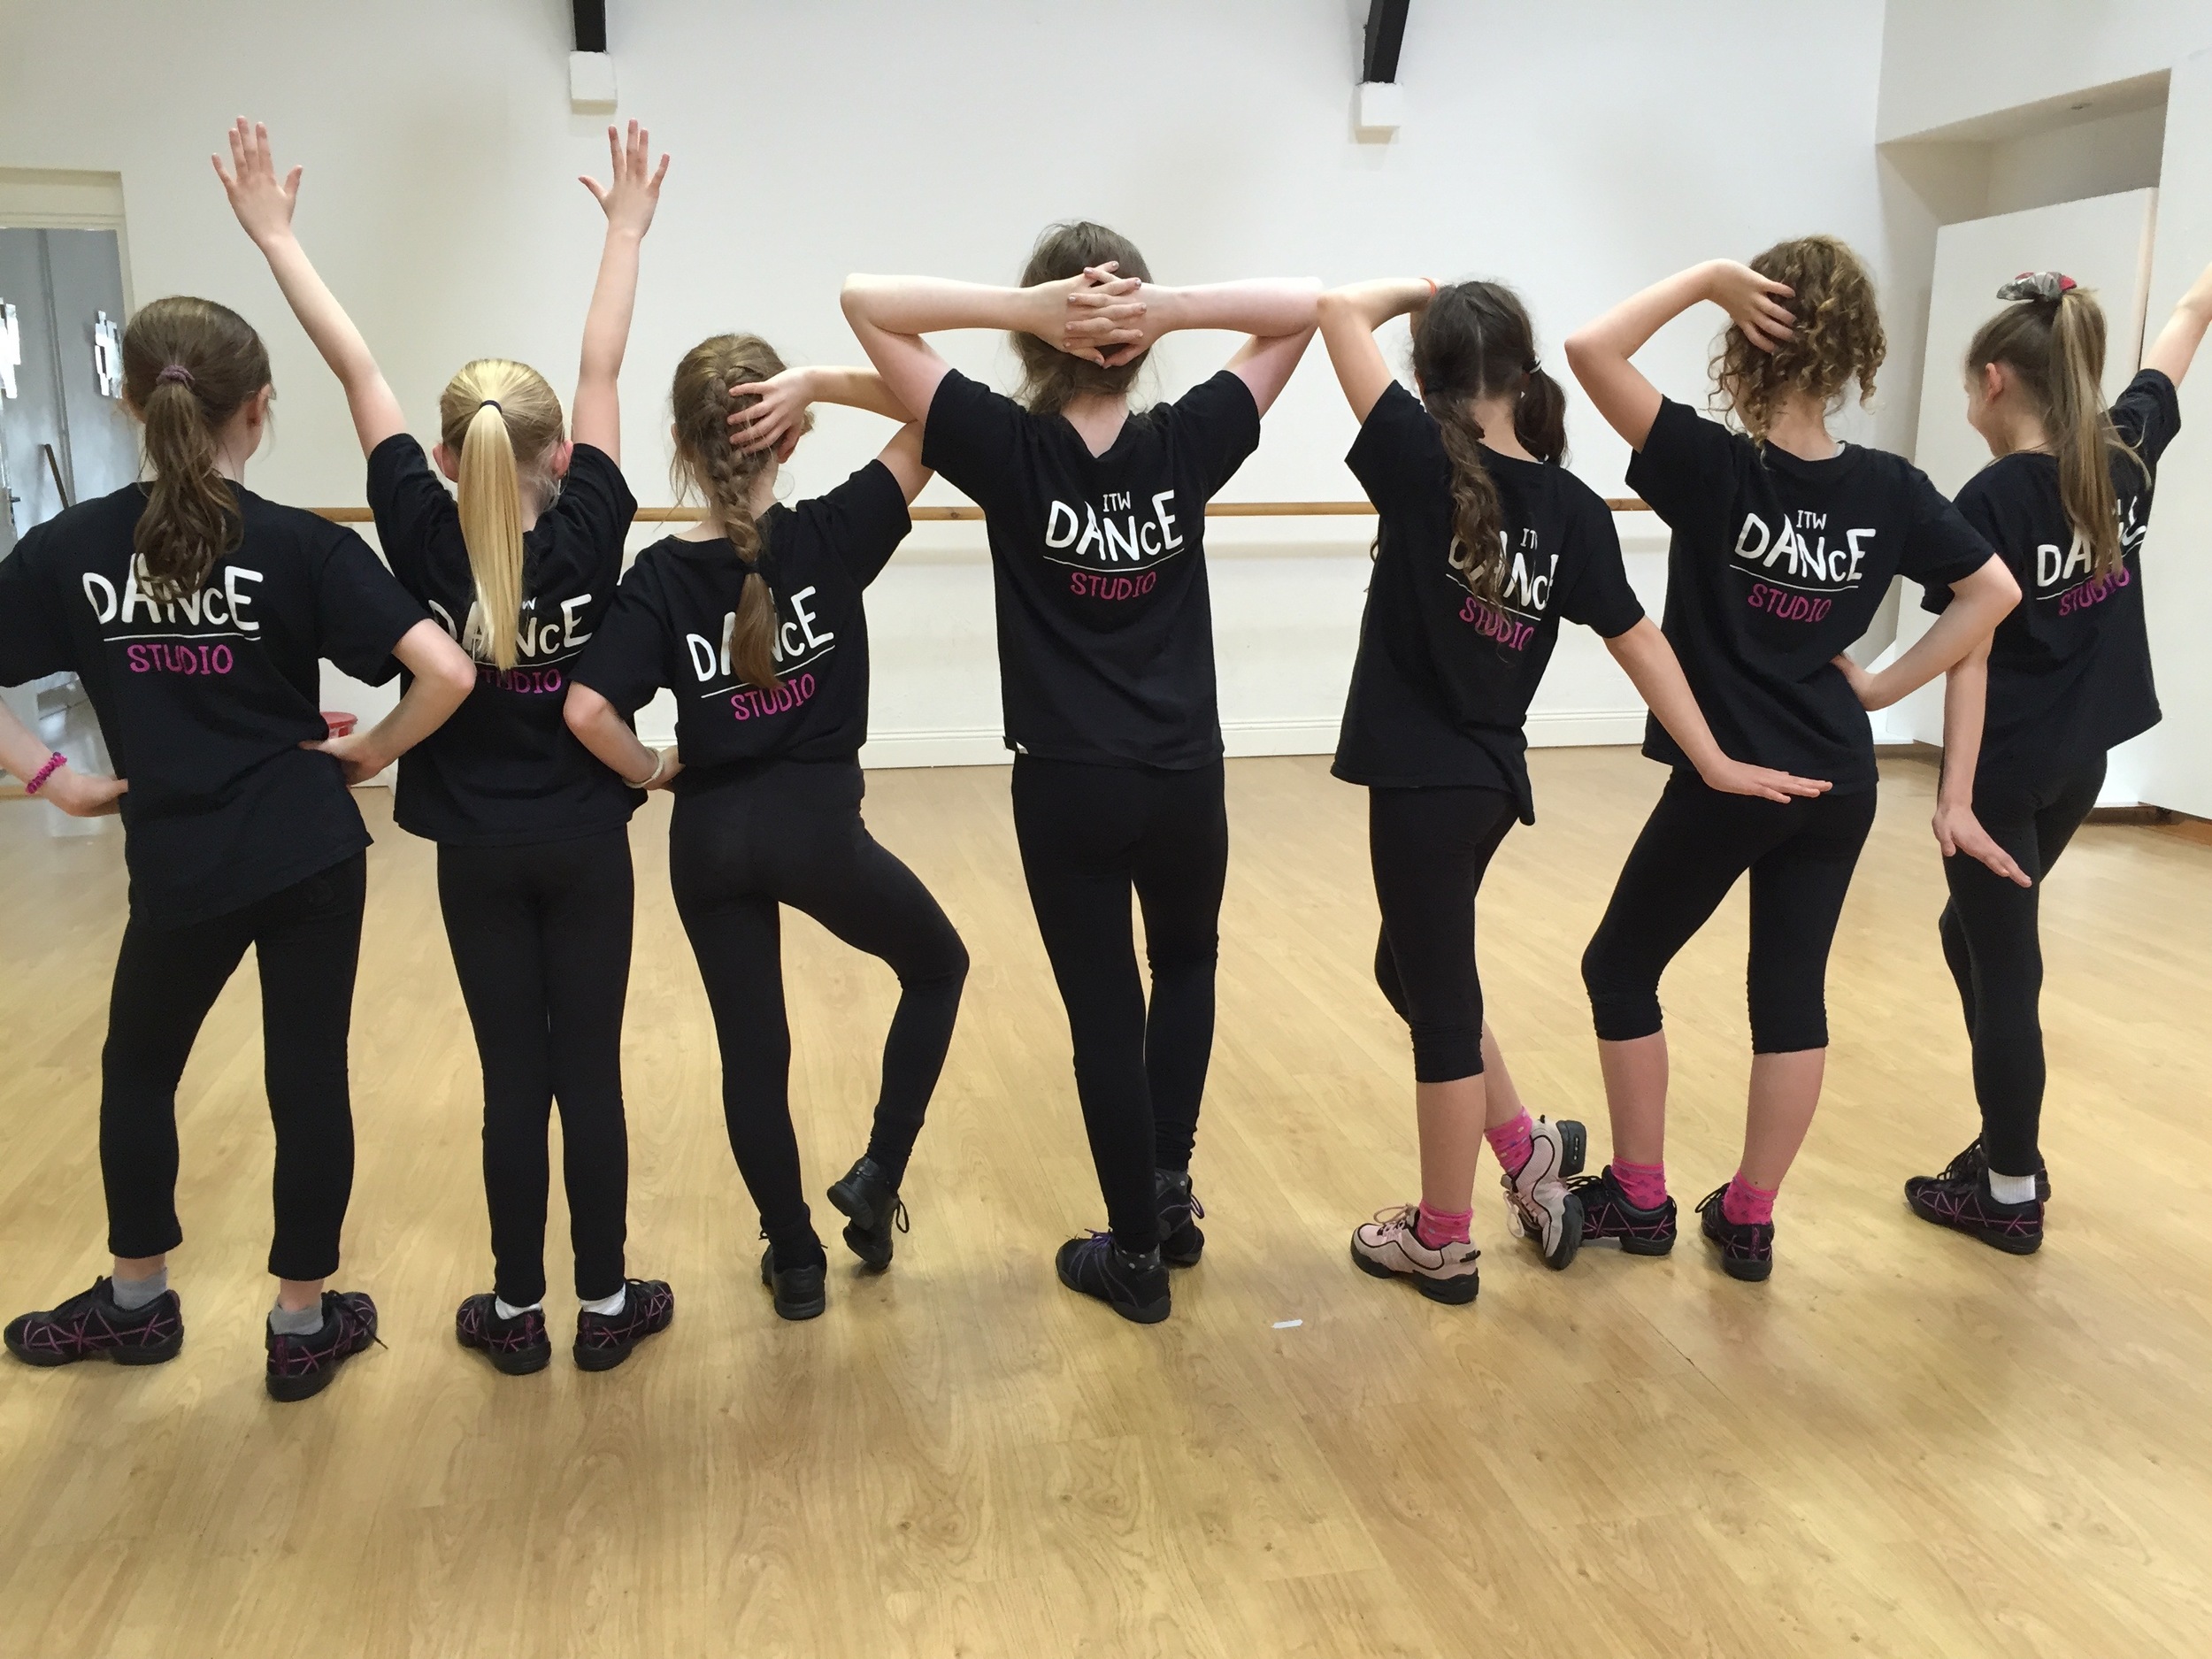 JOIN OUR DANCE COMPANY